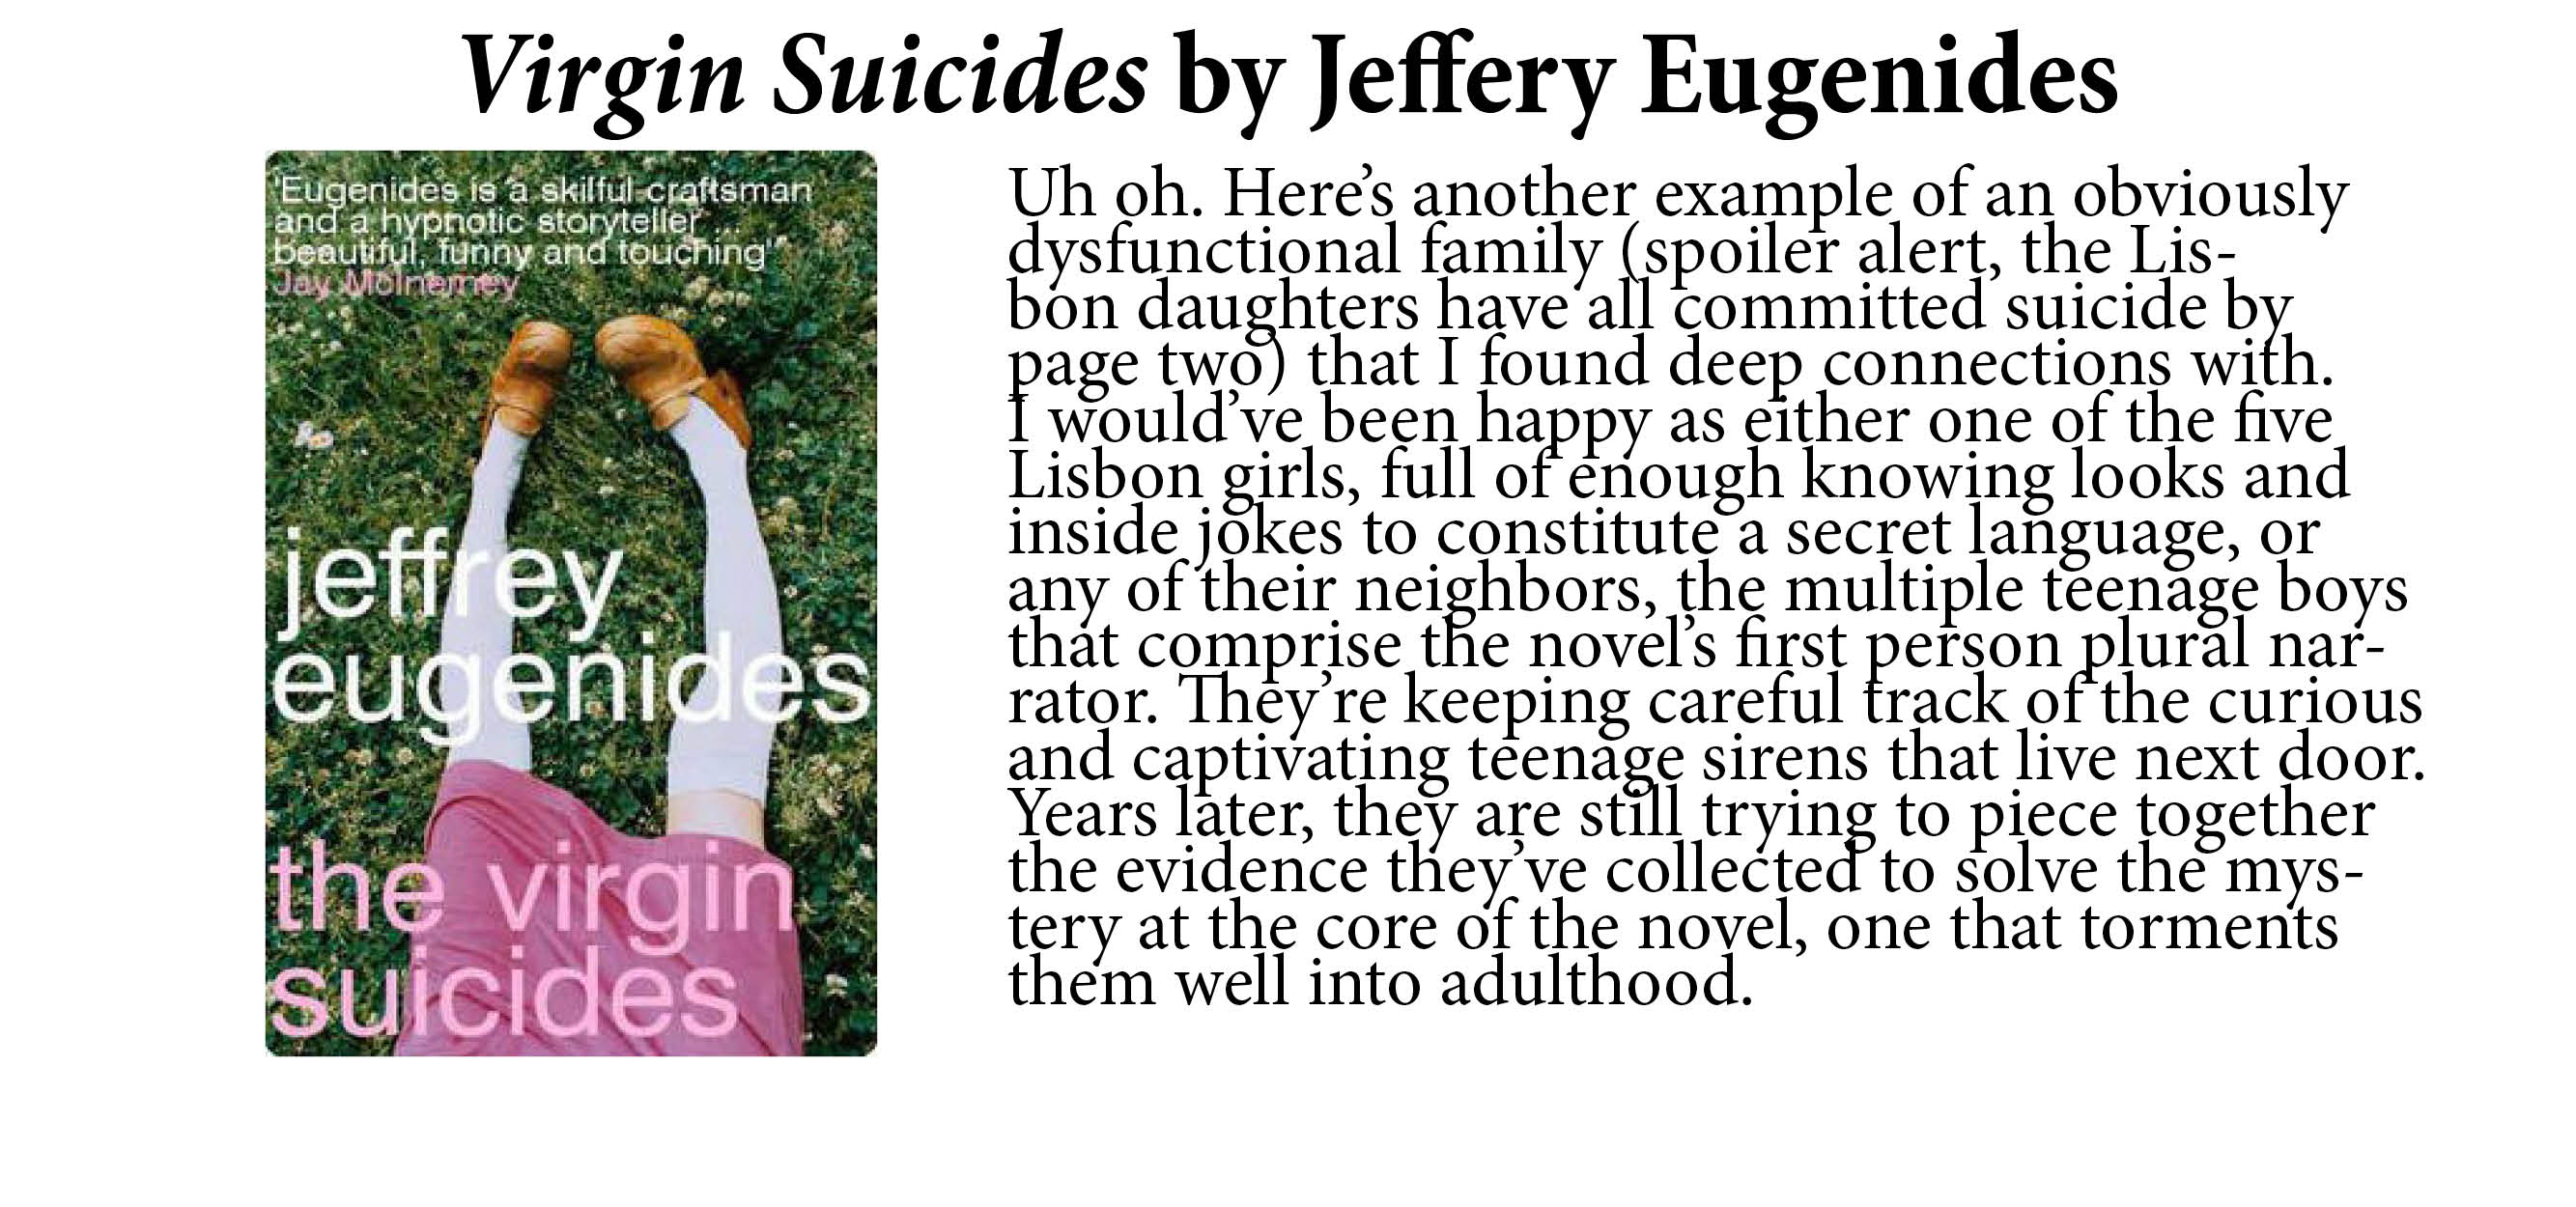 The Virgin Suicides by Jeffery Eugenides